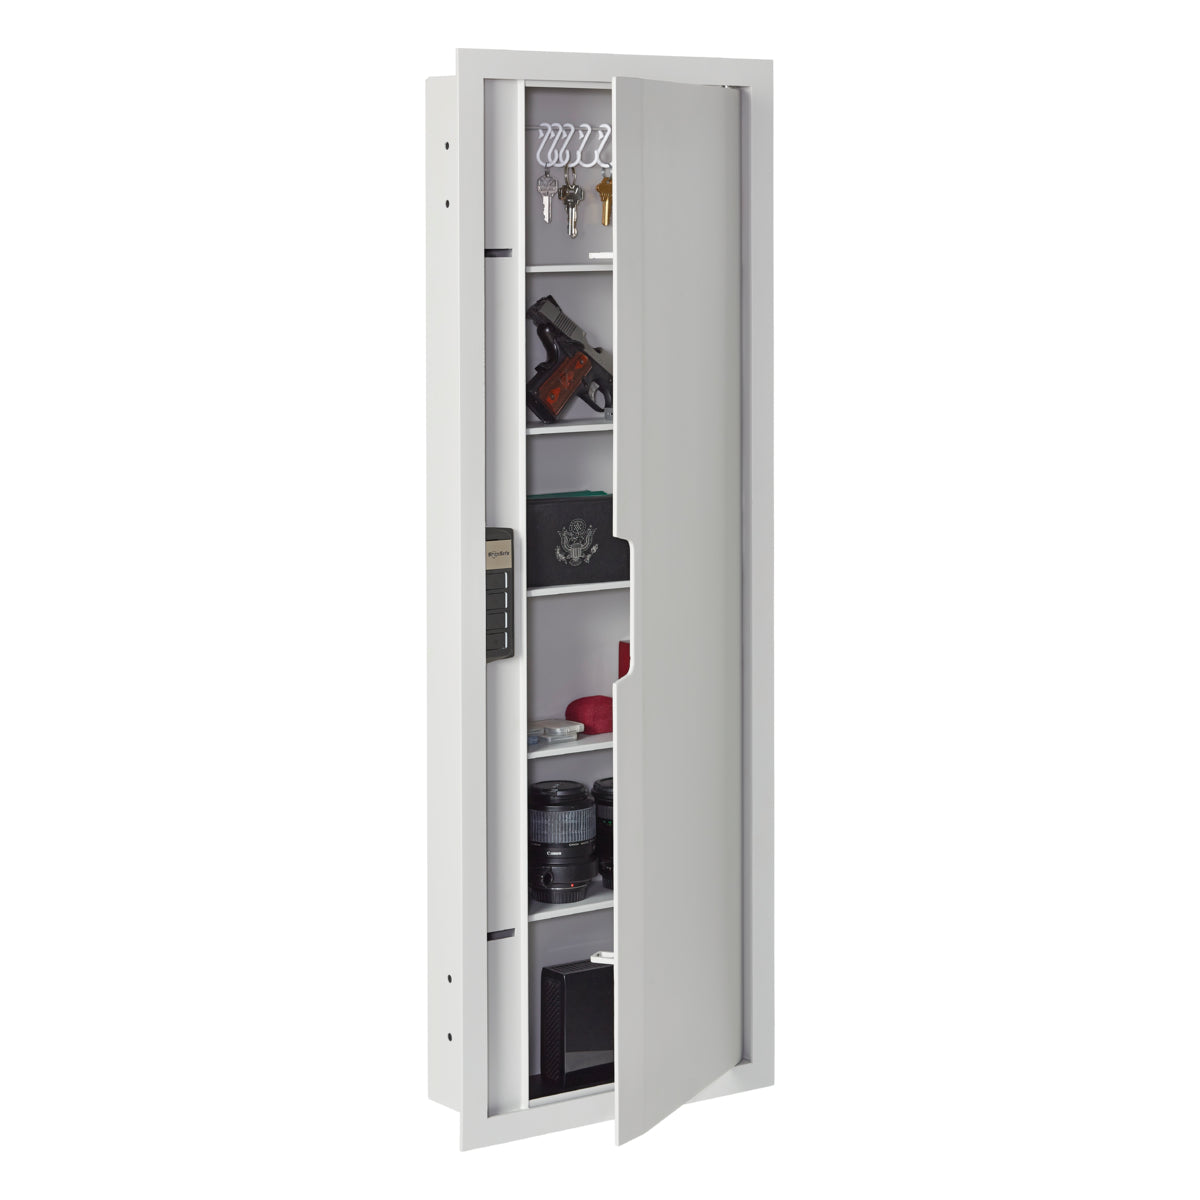 SnapSafe 75414 Tall In-Wall Safe